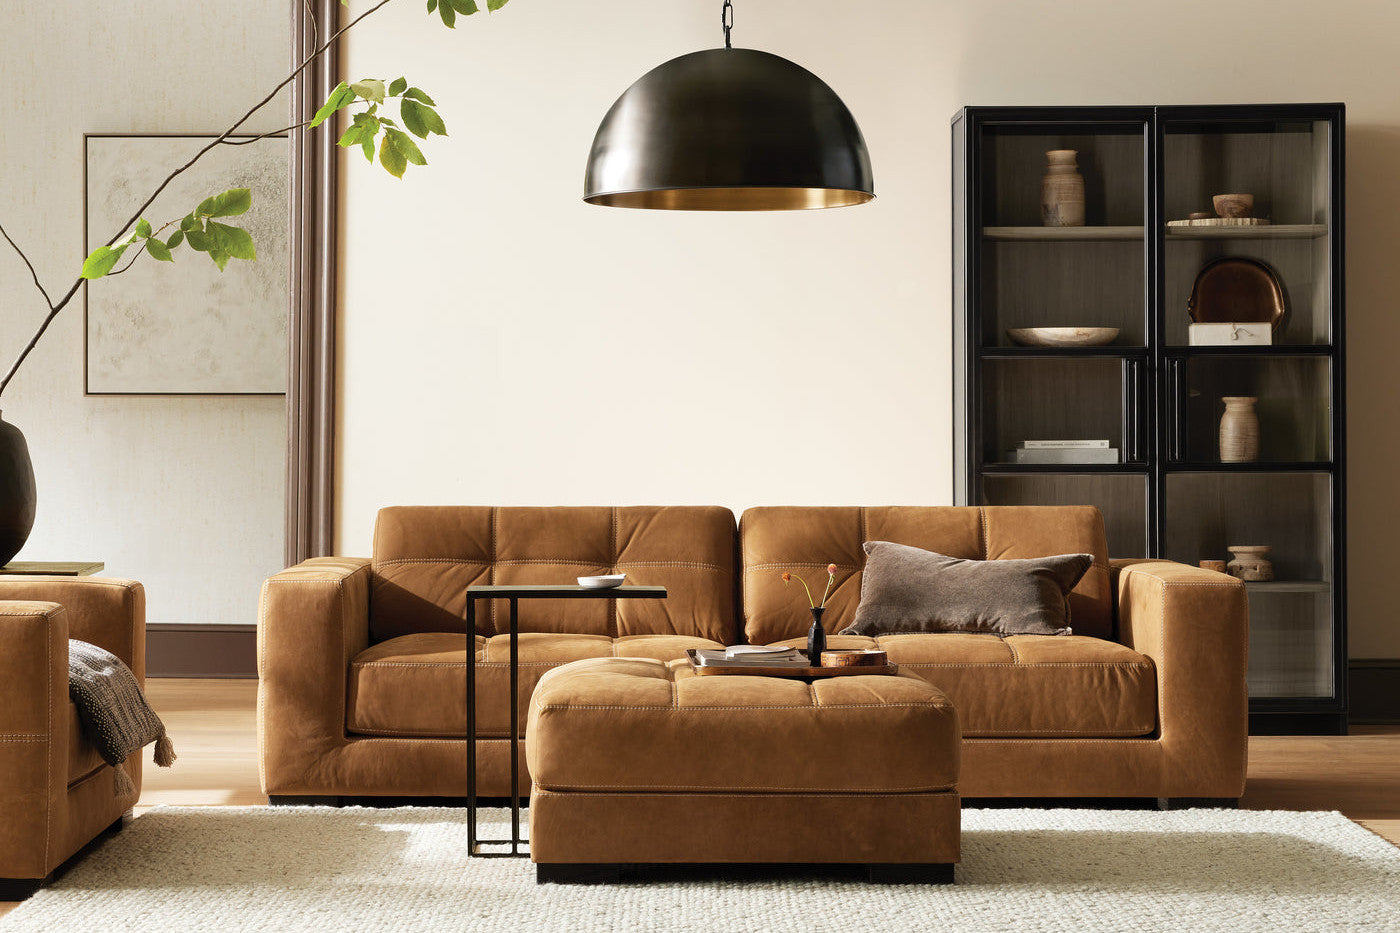 Brown leather sofa with black cabinet and large black pendant light